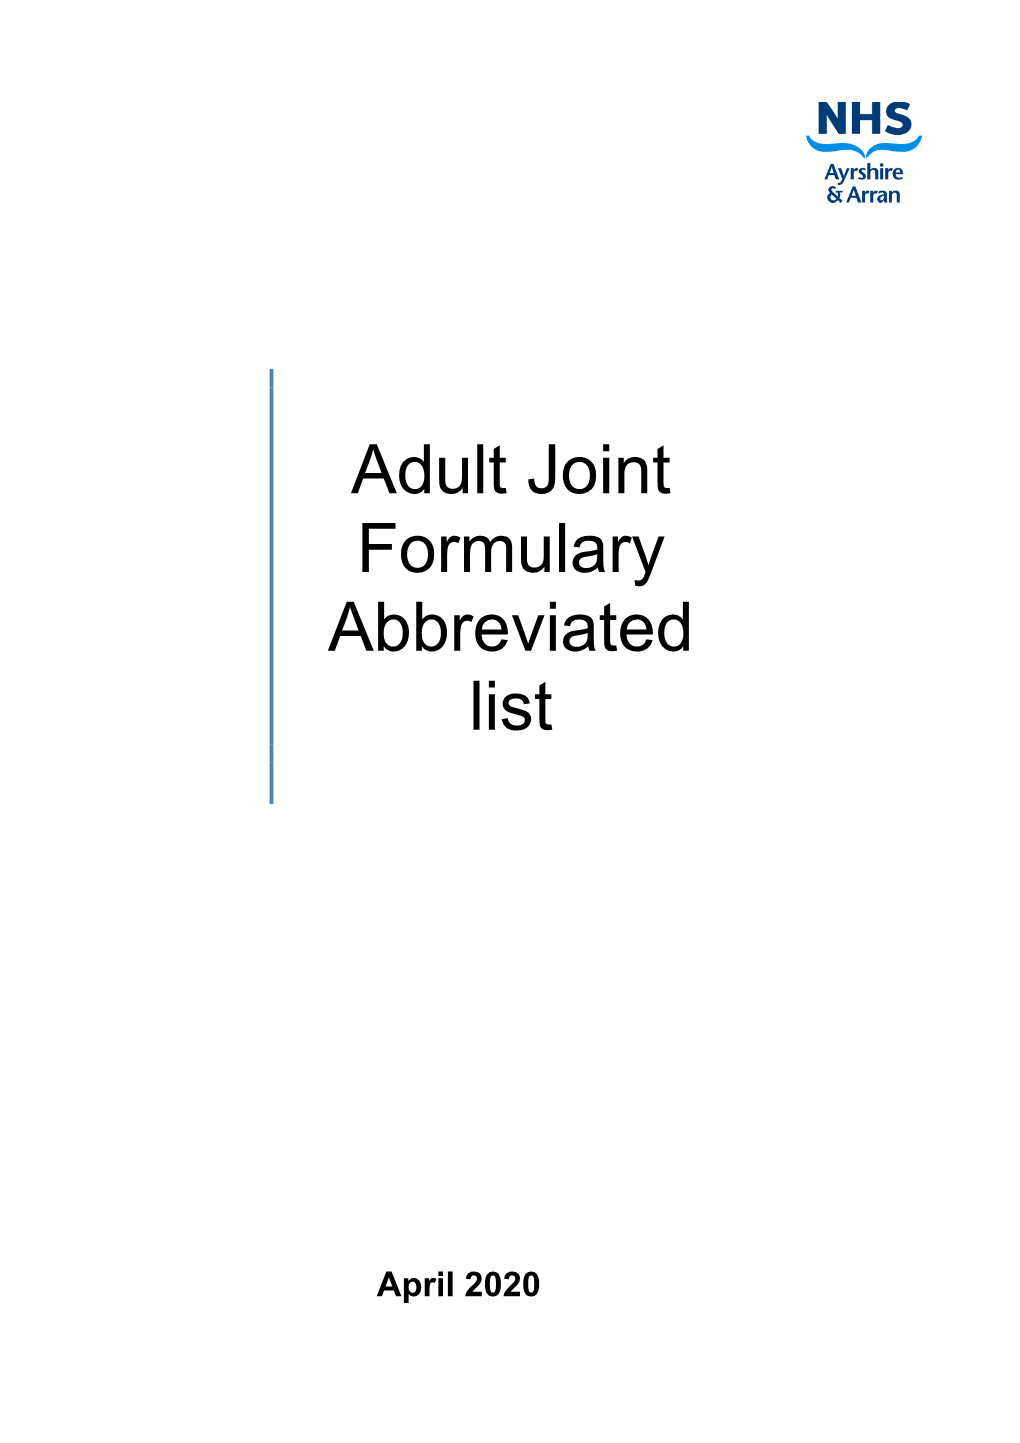 Adult Joint Formulary Abbreviated List